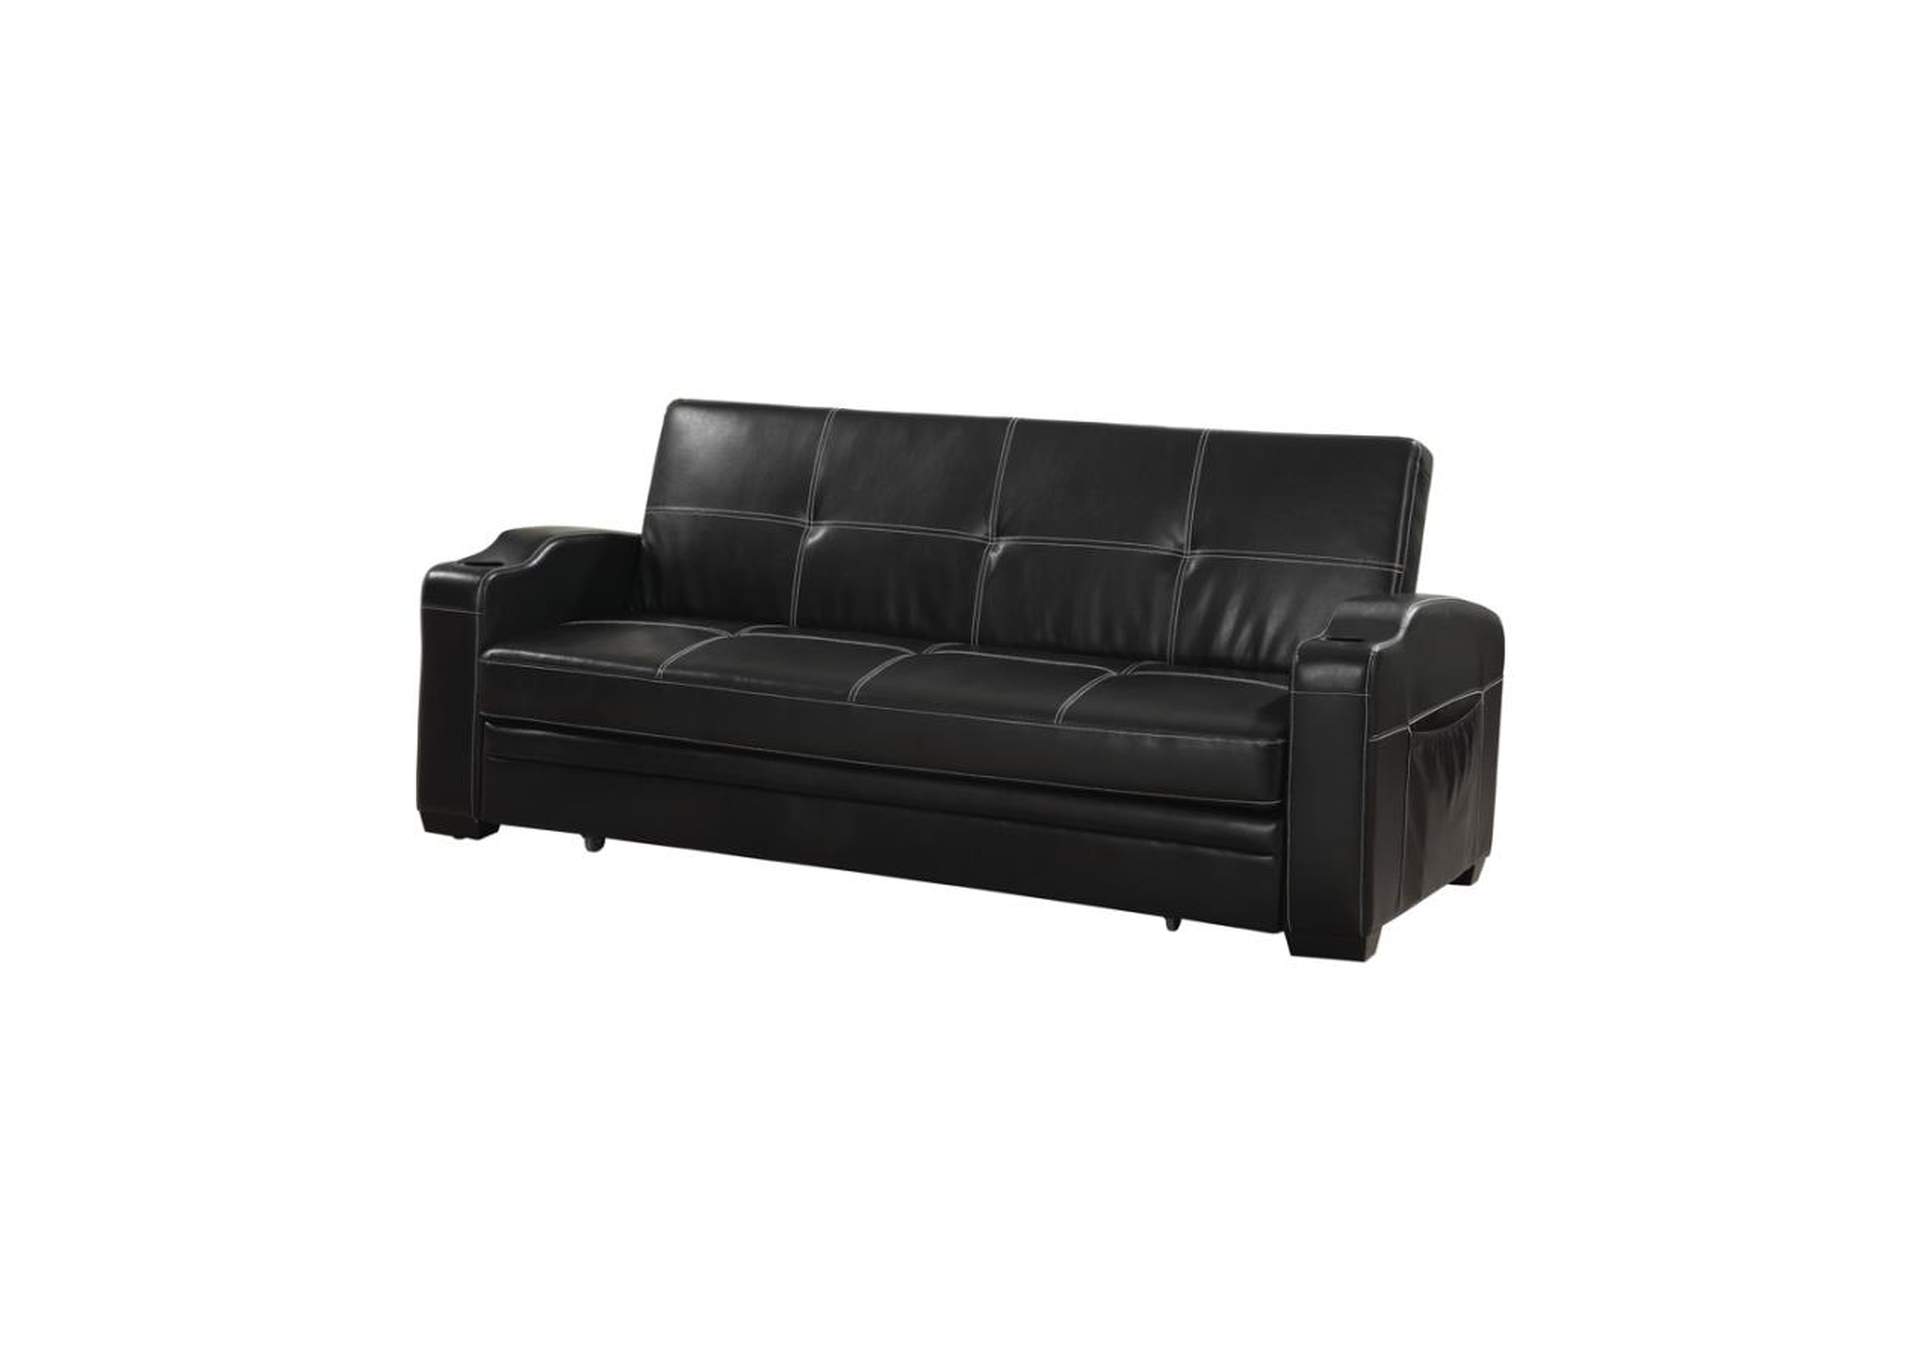 Avril Upholstered Sleeper Sofa Bed with Cup Holders Black,Coaster Furniture